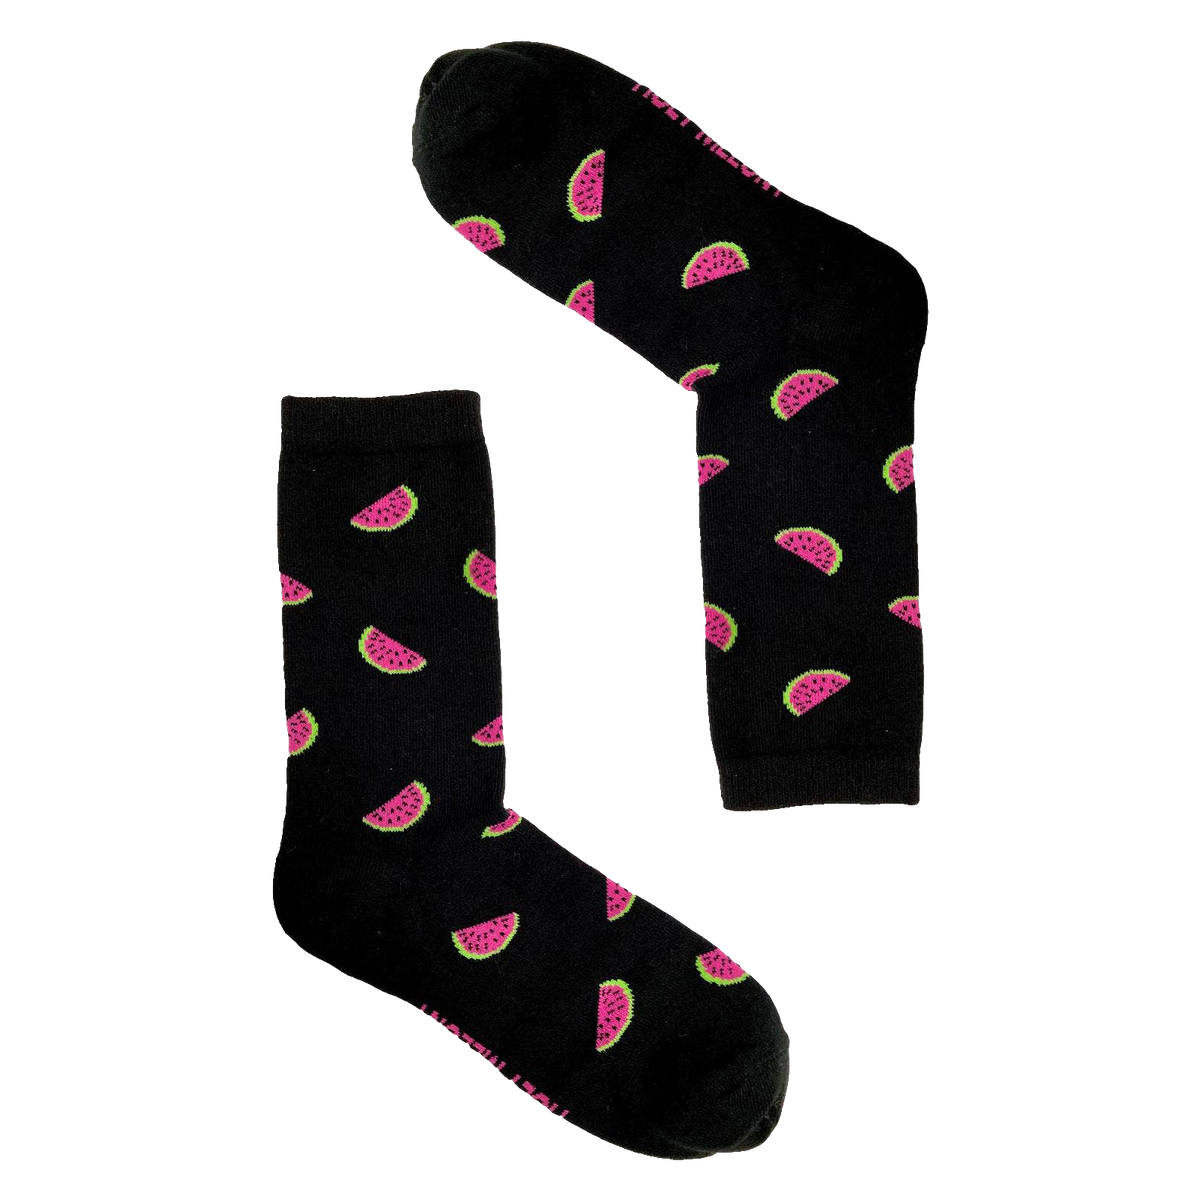 One in a Melon&#39; Socks - 2 Pairs